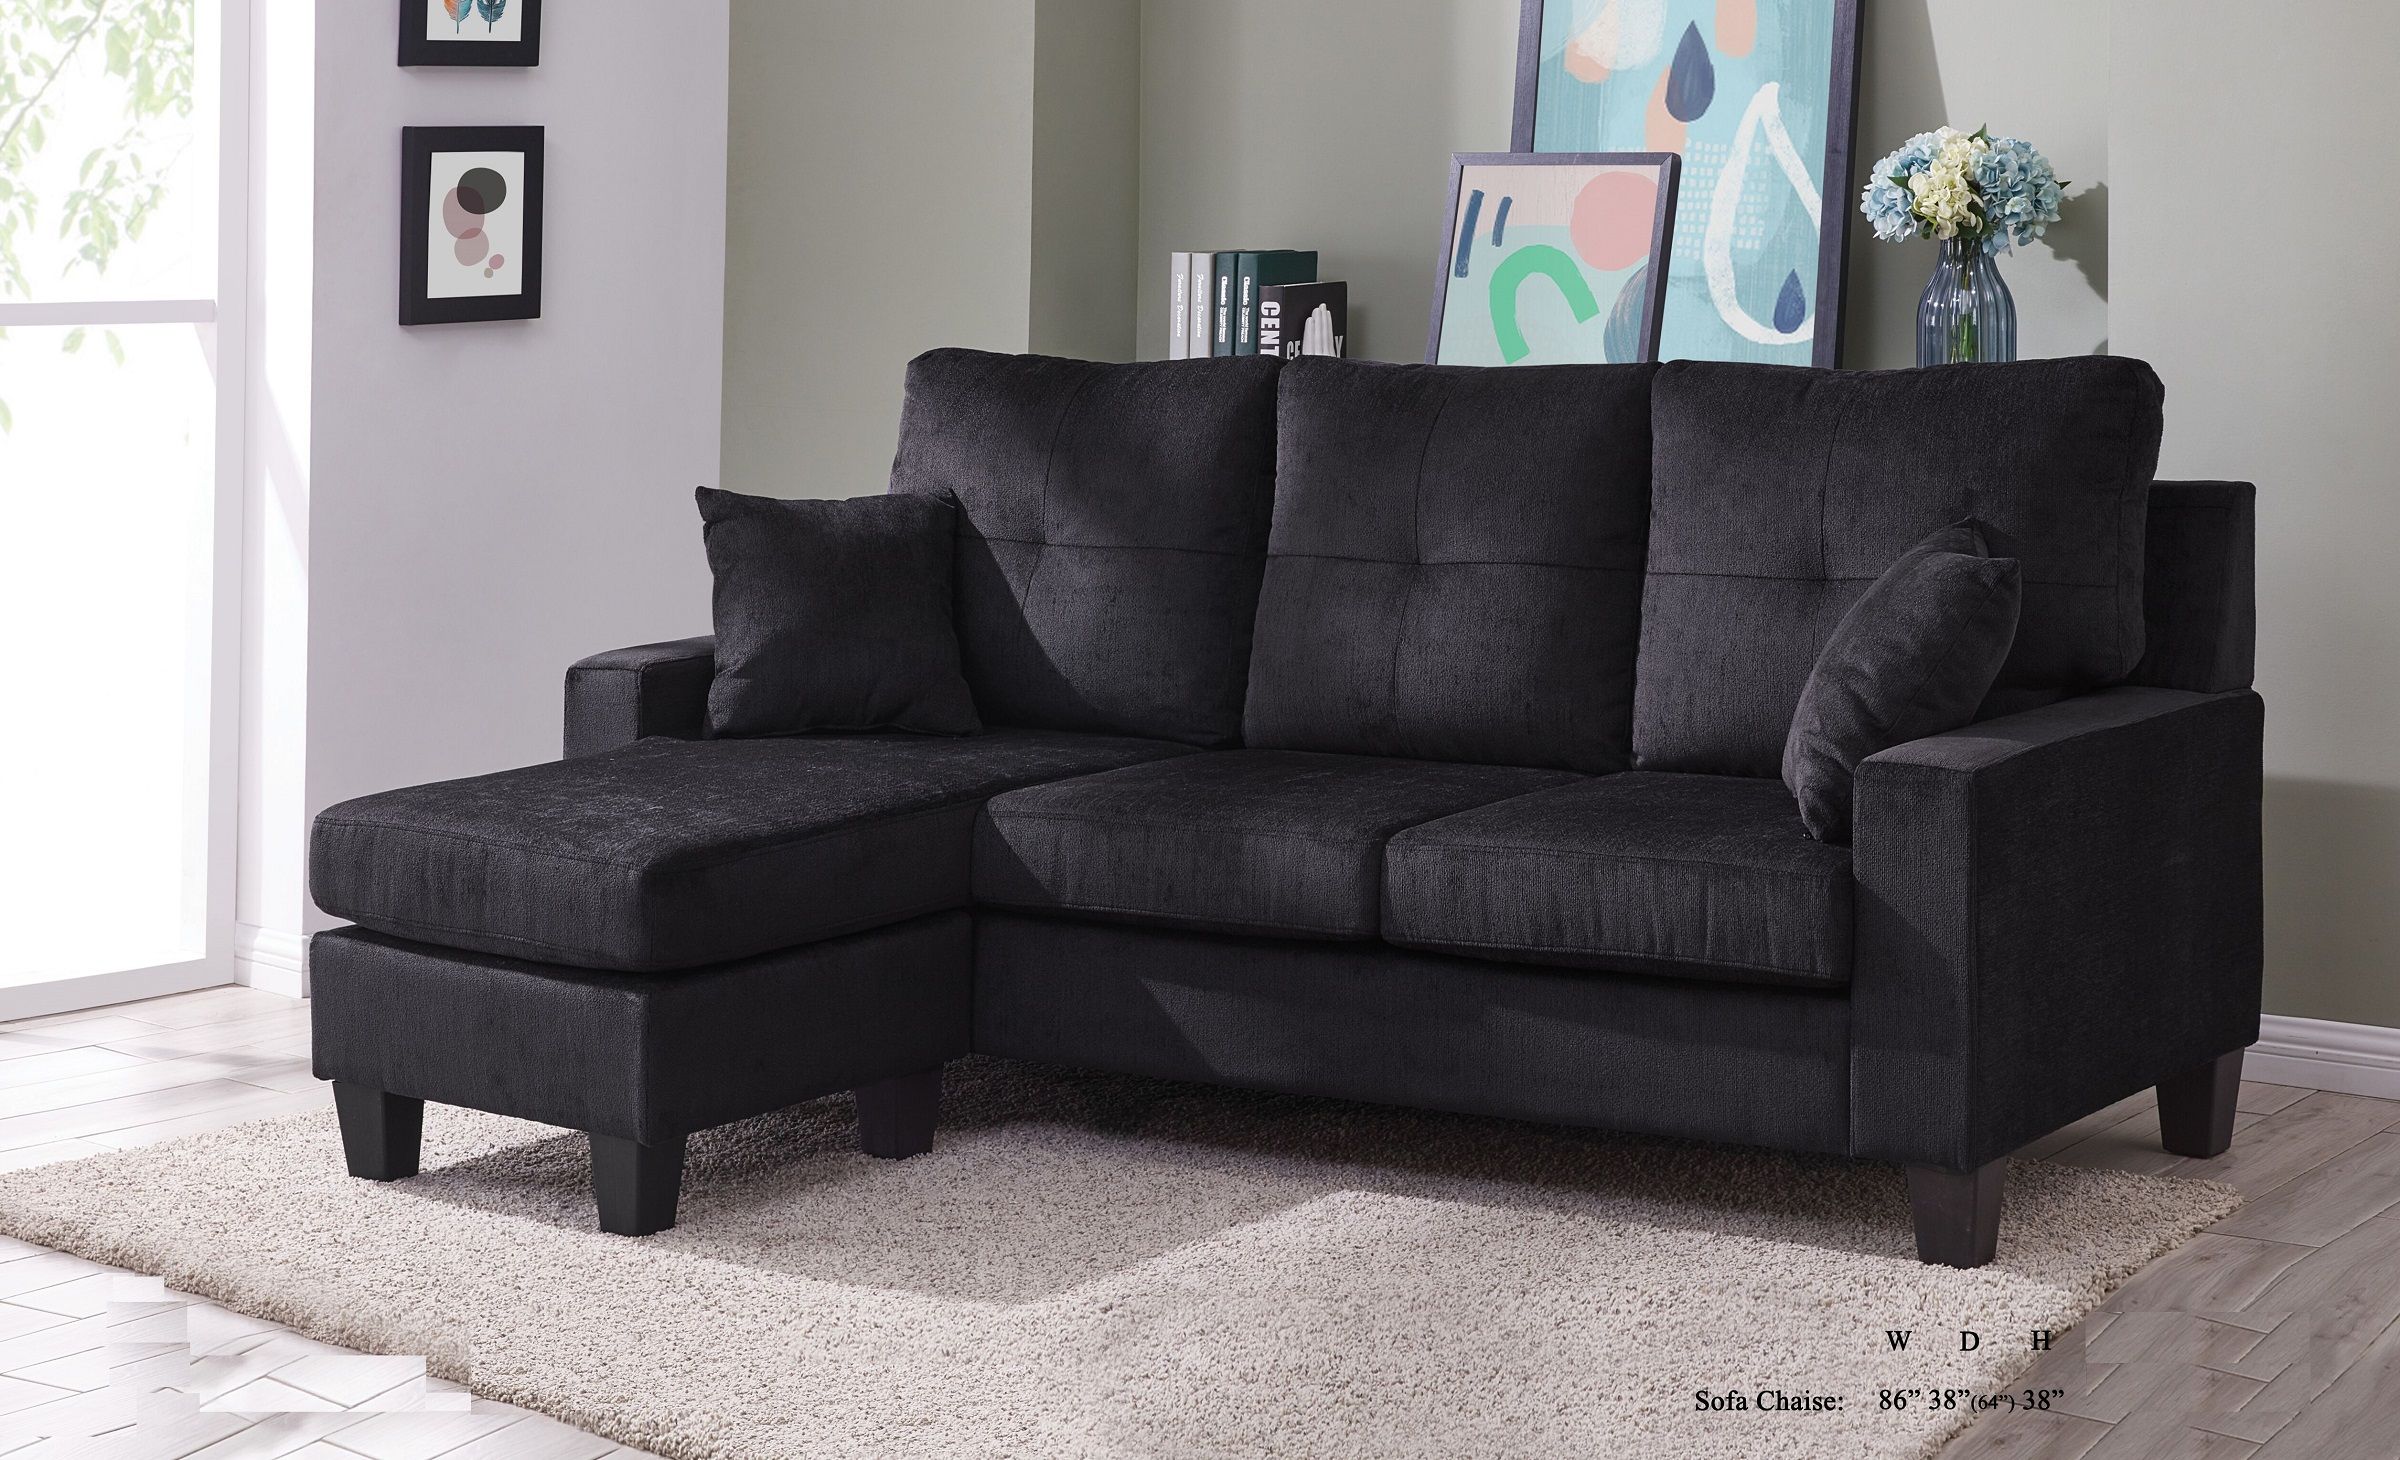 Sectional Sofa Set Black Fabric Tufted Cushion Sofa Chaise Within Sofa Chairs For Living Room (View 1 of 15)